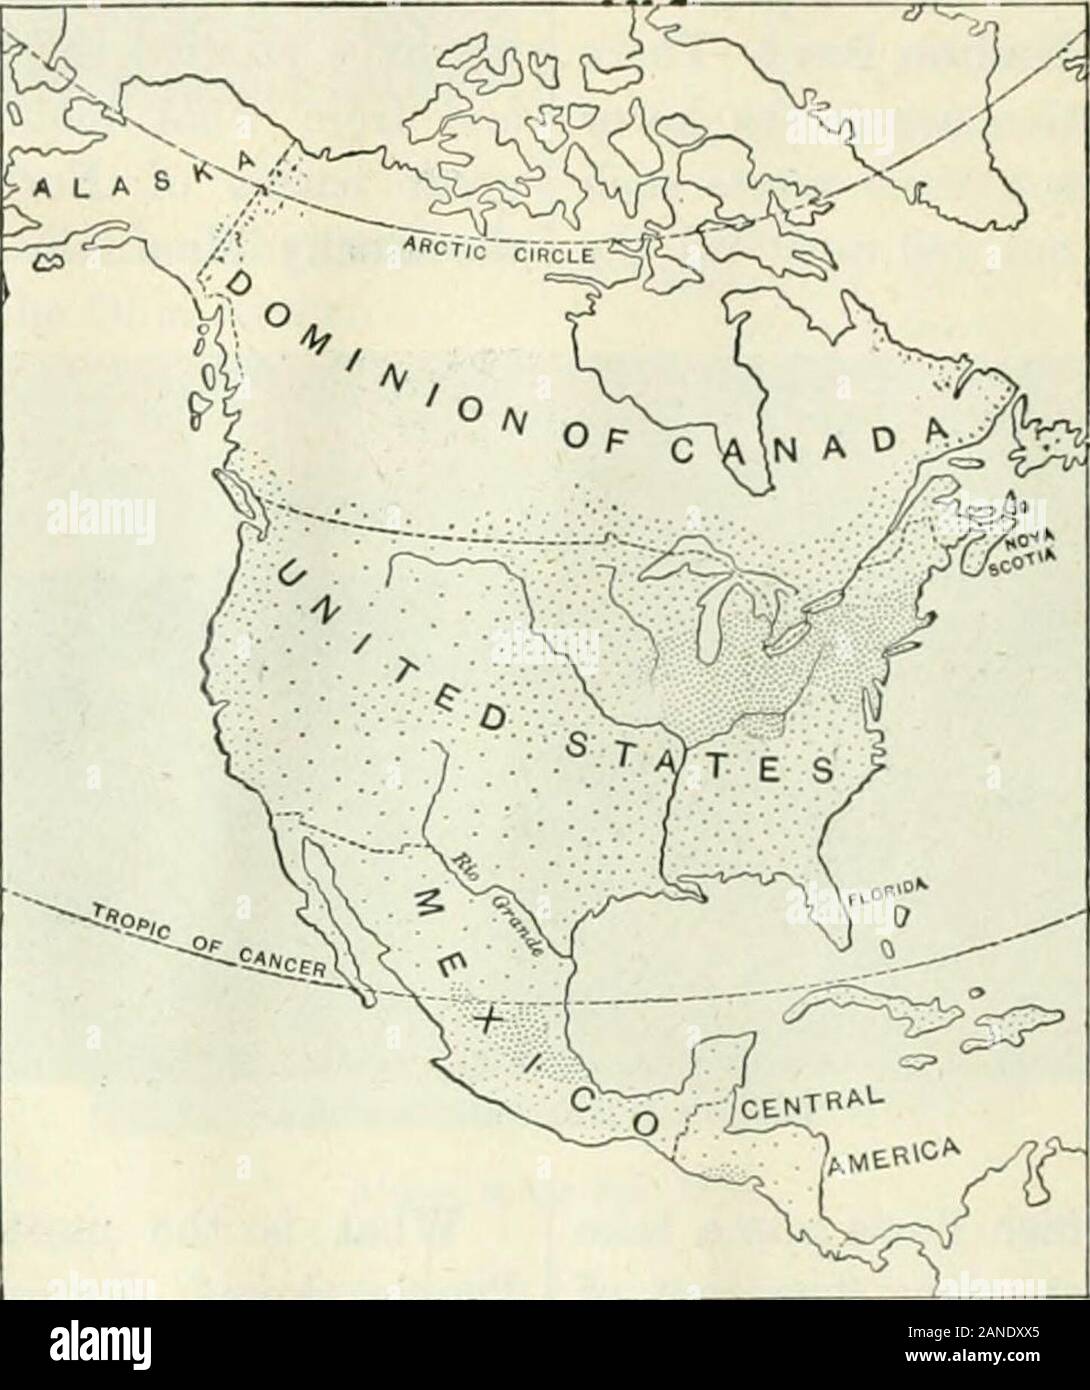 New elementary geography : adapted for use in Canadian schools . shore of North America, thp Englishpeople claimed nearlythe whole of the con-tinent, and Englandstill rules the northernpart, called the Domin-ion of Canada, inwhich we live. Findit on the map. Great Britain alsoowned the easternpart of North Amer-ica, south of Canada,and many people camefrom England to livethere. They settledall along the coastsand rivers in colonies,and more people keptcoming over from theBritish Isles for manyyears until at lastthere were thirteen of these colonies. After IGO years the countryeast of the Appal Stock Photo